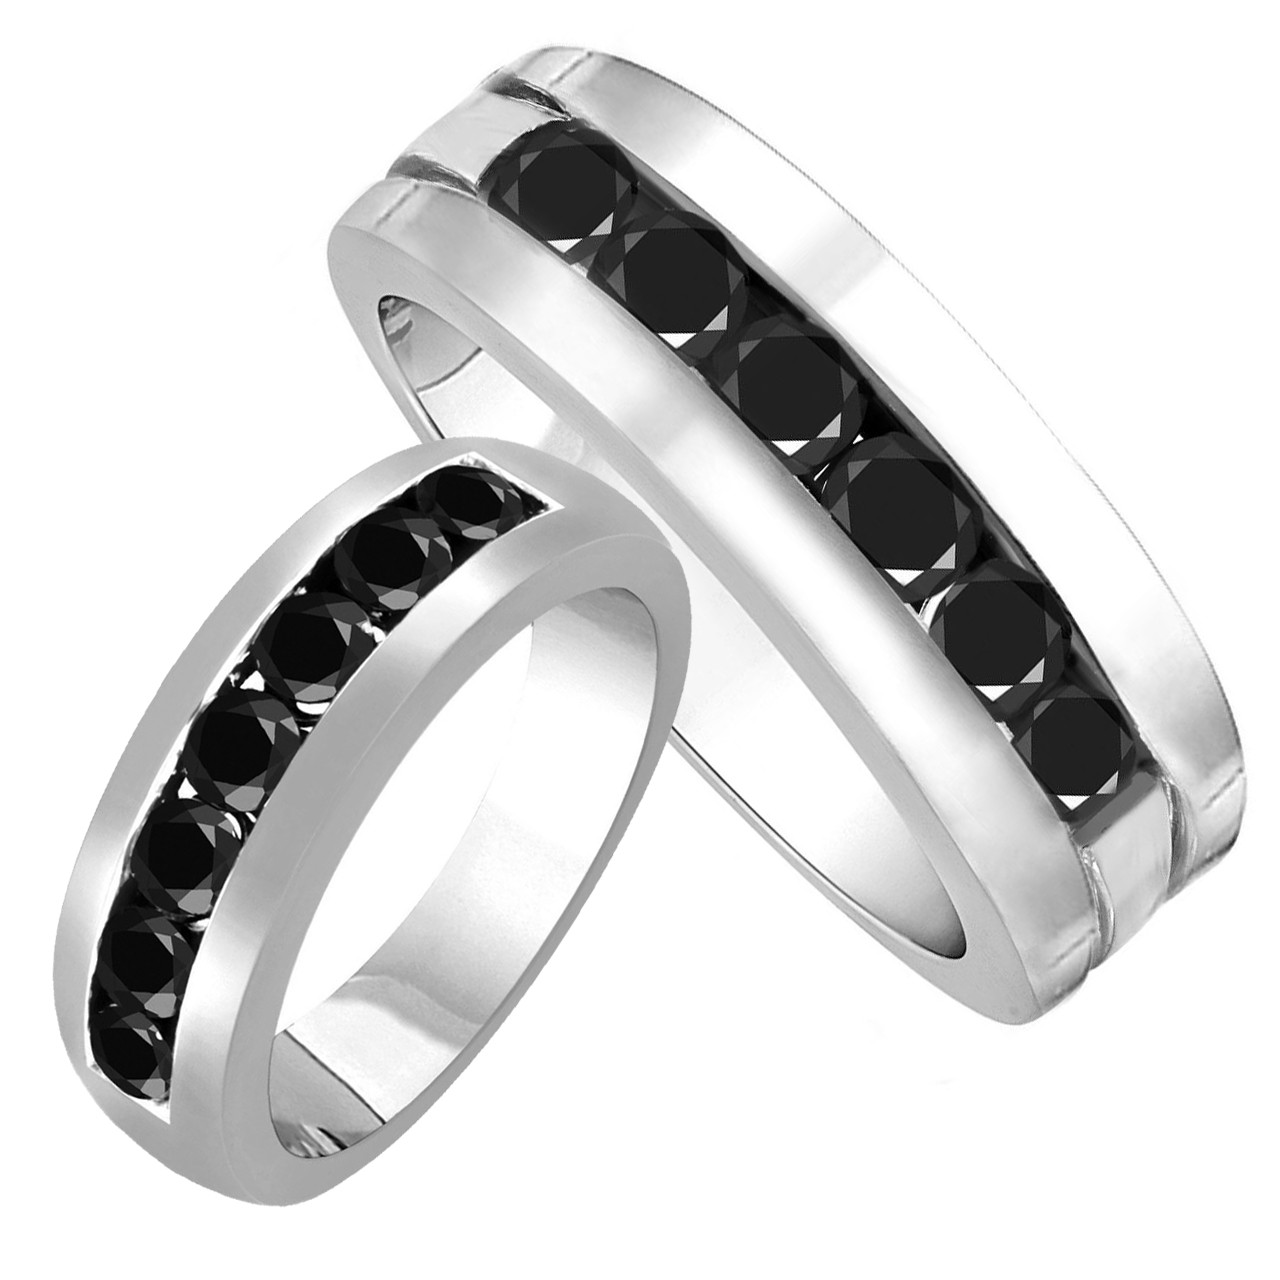 His And Hers Wedding Bands Unique Black Diamond Matching Rings Couple Wedding Bands Set 3.00 Carat Half Eternity Rings 14K White Gold  64290.1503242463 ?c=2